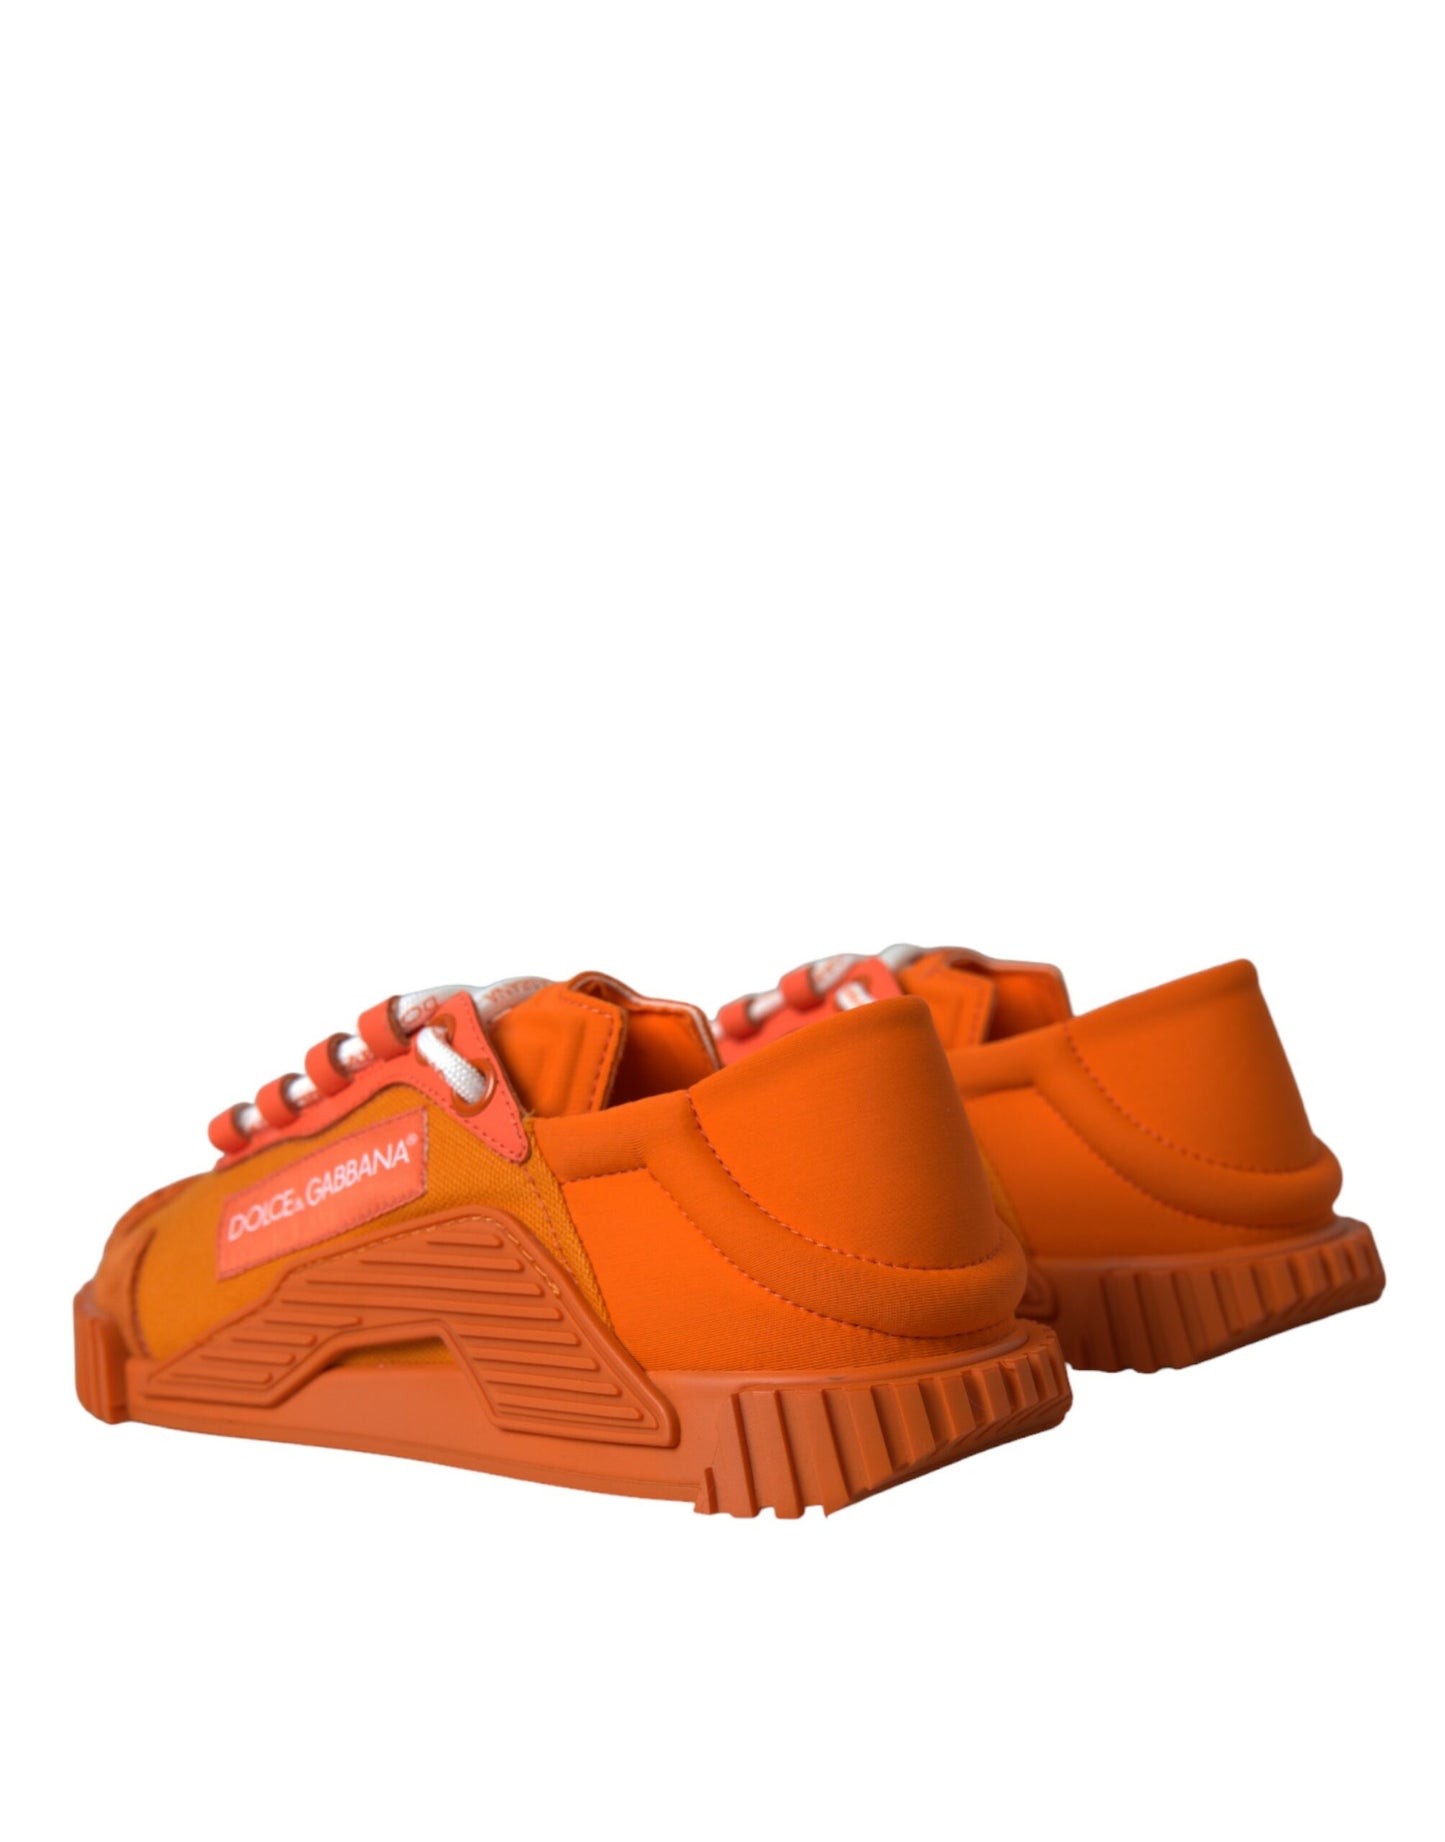 Dolce & Gabbana Orange NS1 Low Top Sports Sneakers Shoes